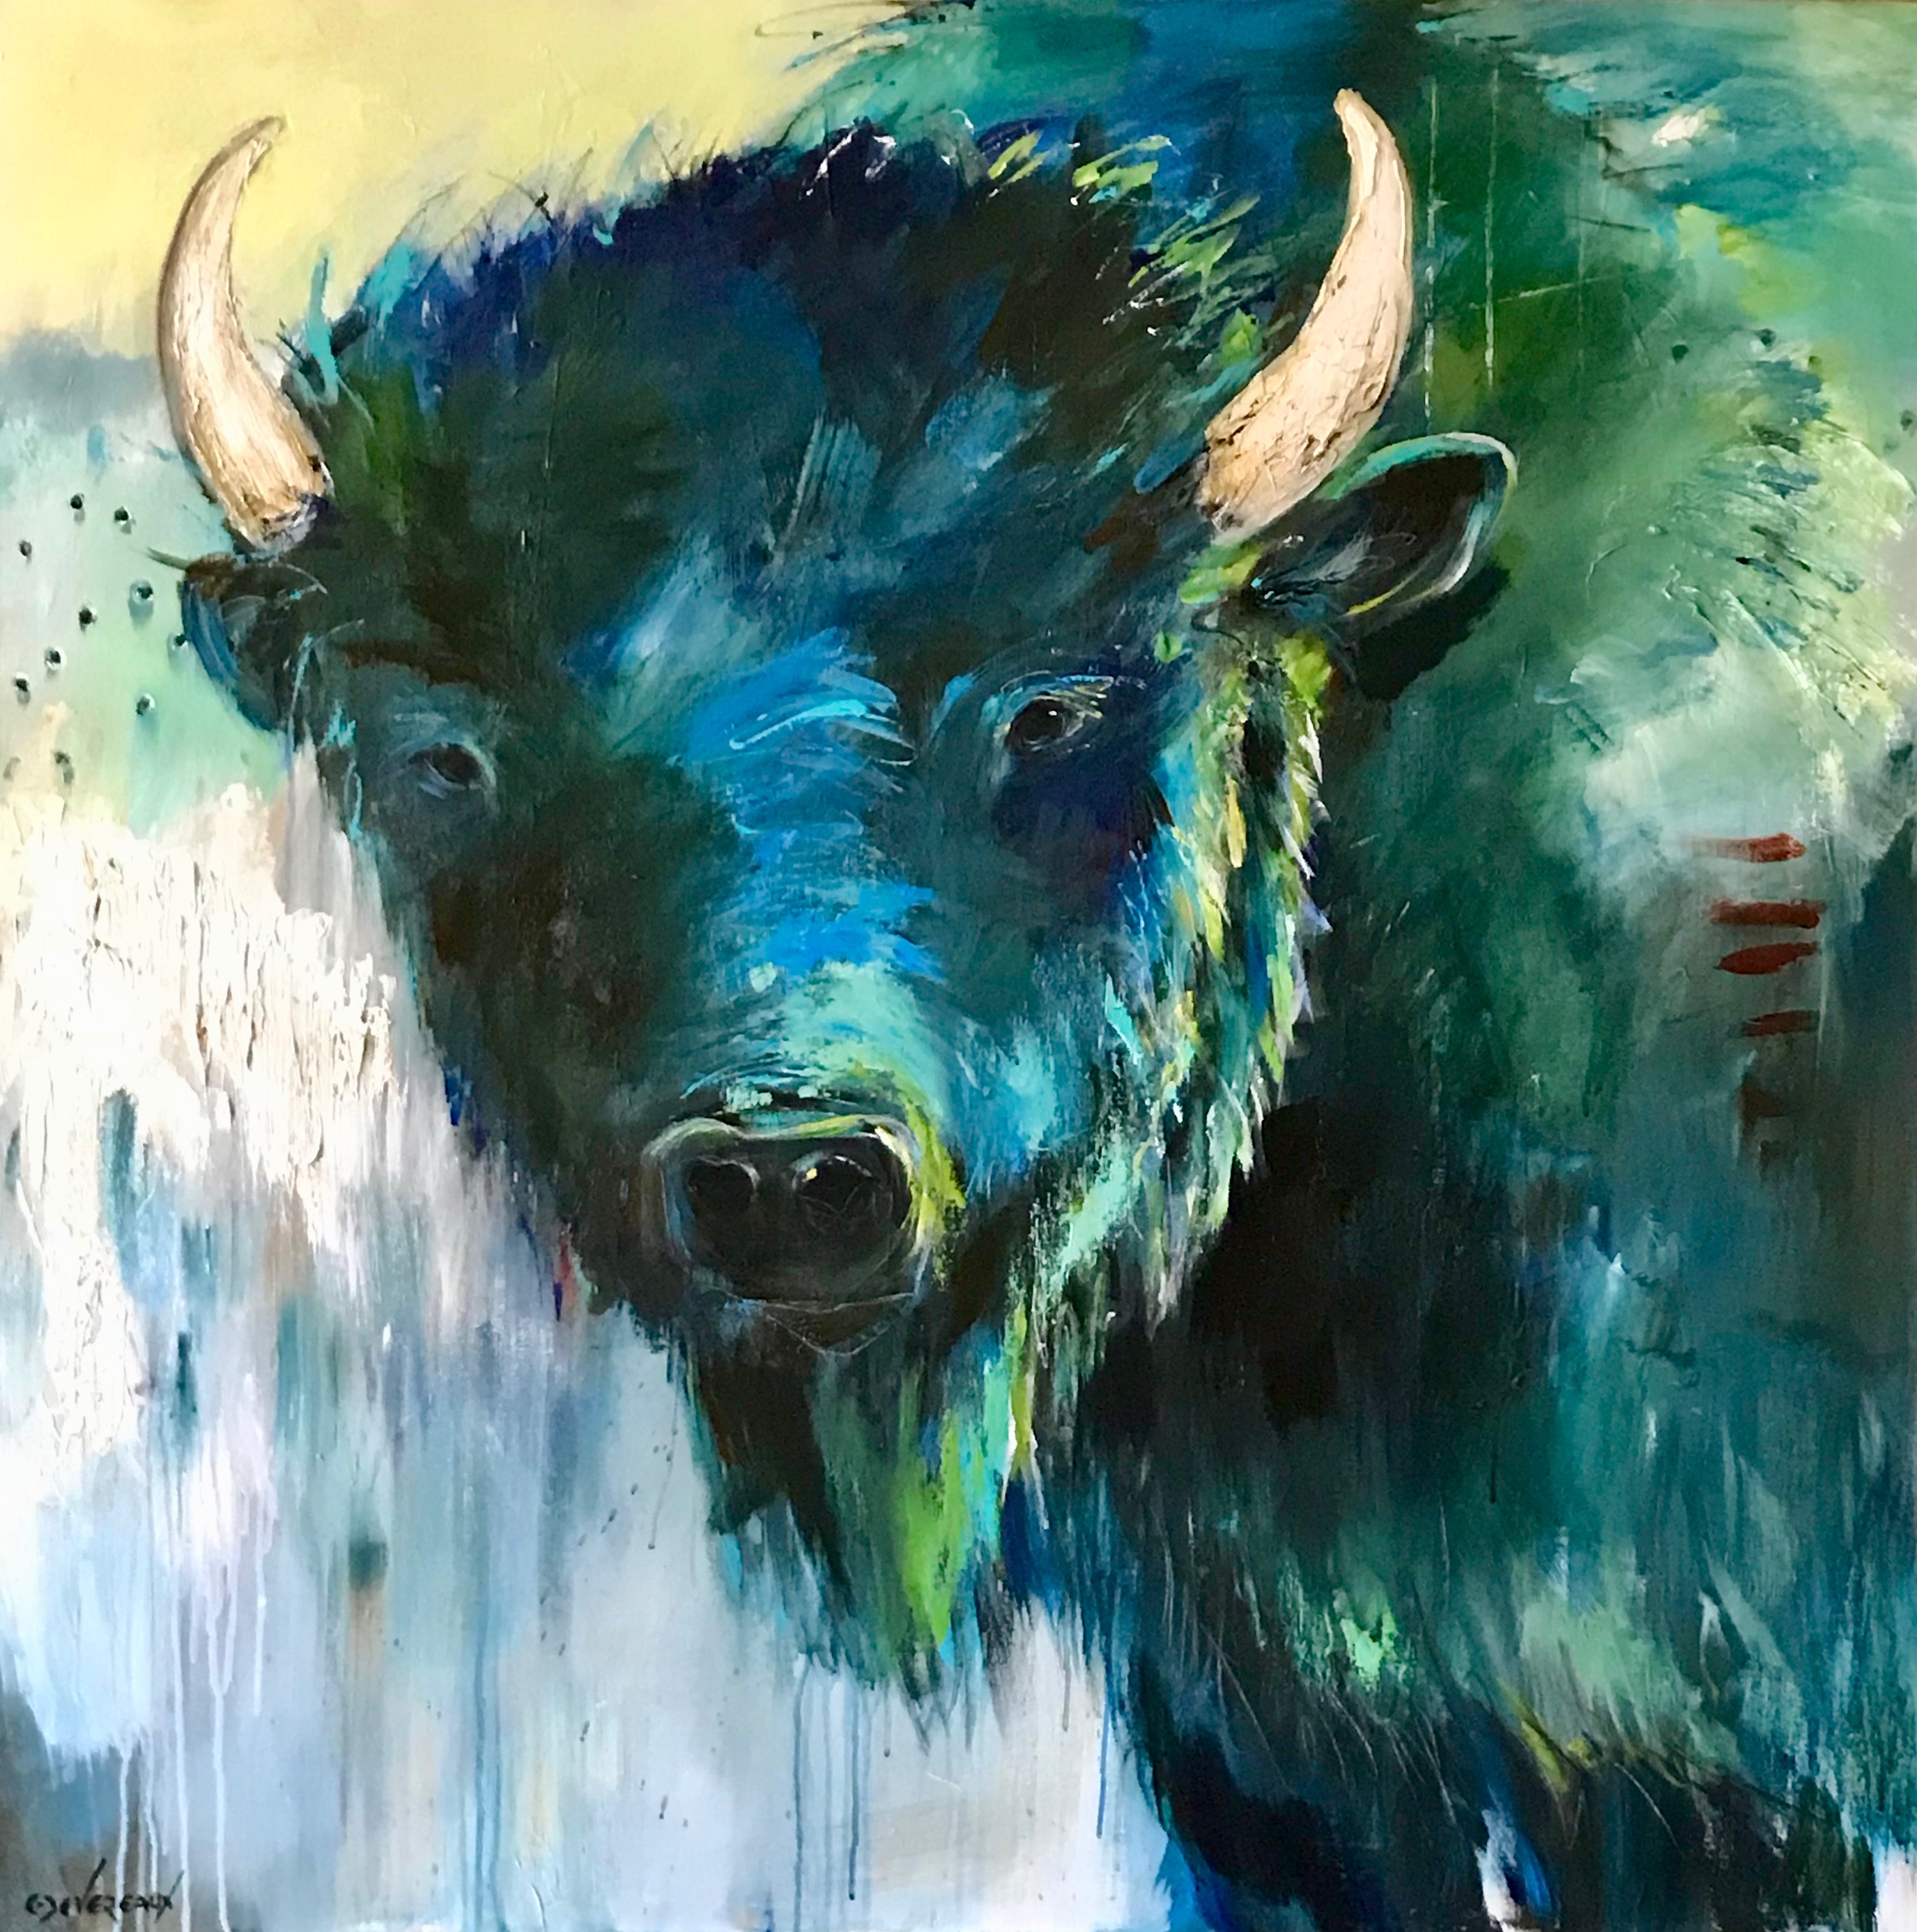 'The Blues' 42x42 Contemporary Modern Bison Buffalo Painting by Cher Devereaux on stretched canvas